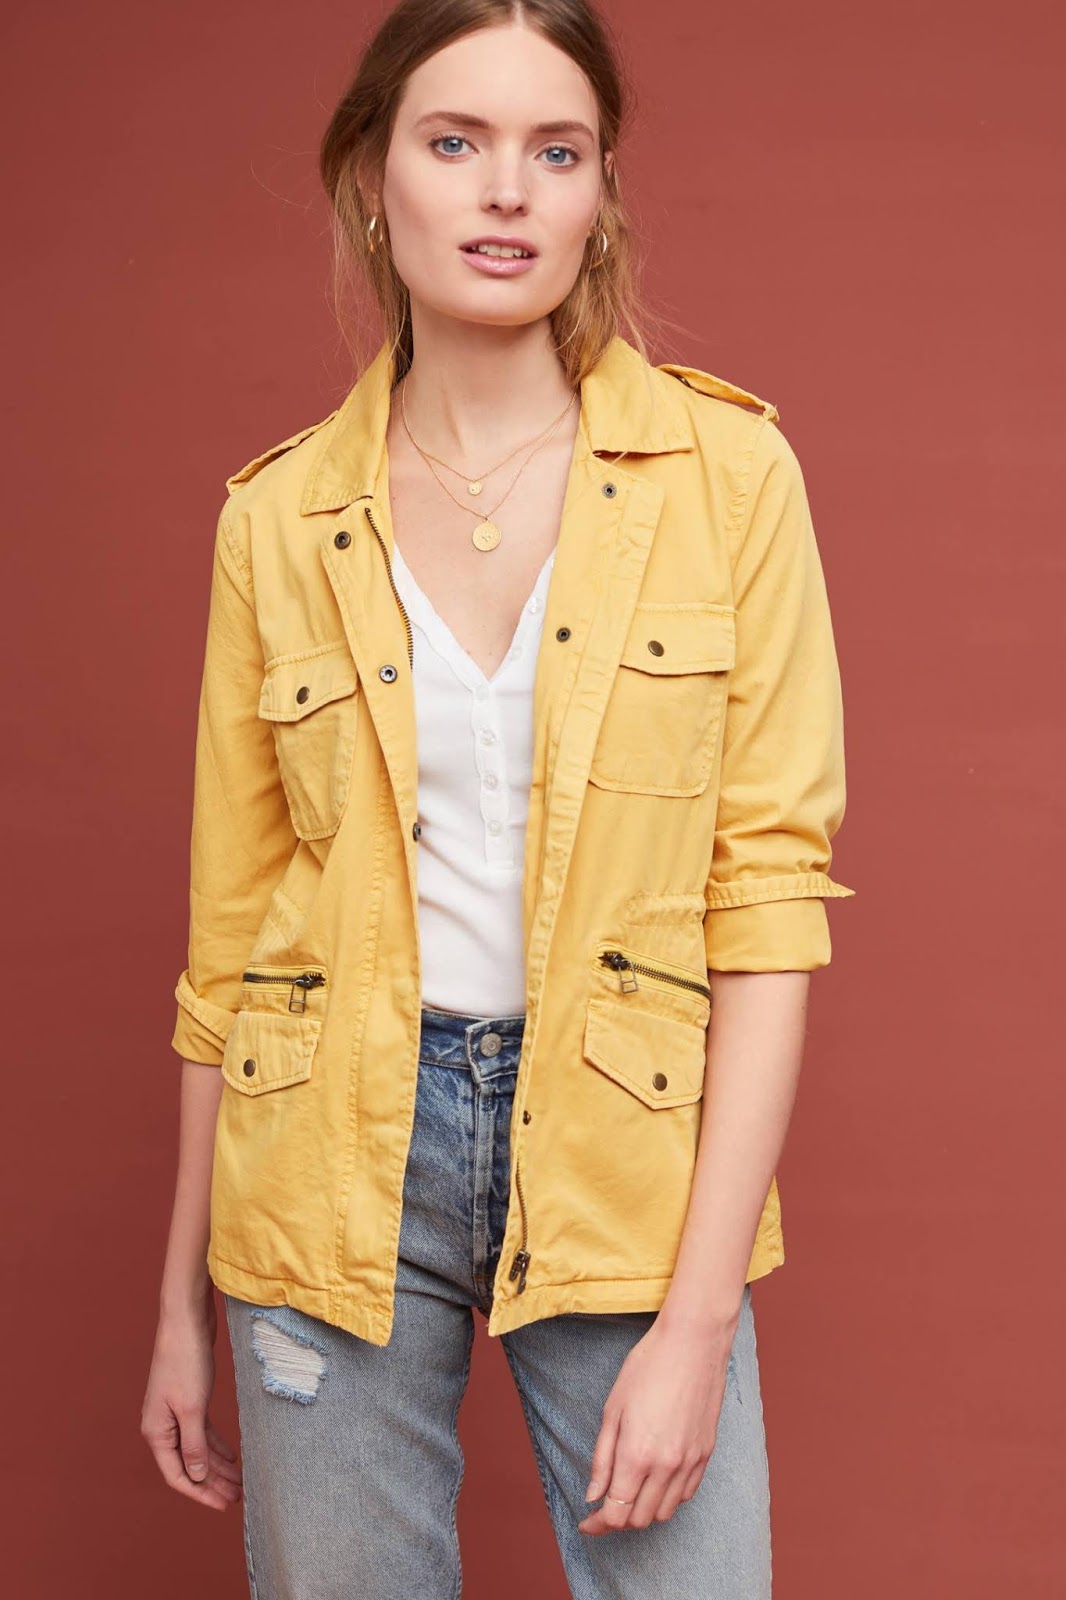 Investigating the Anthropologie late May 2018 new arrivals :: Effortlessly with Roxy